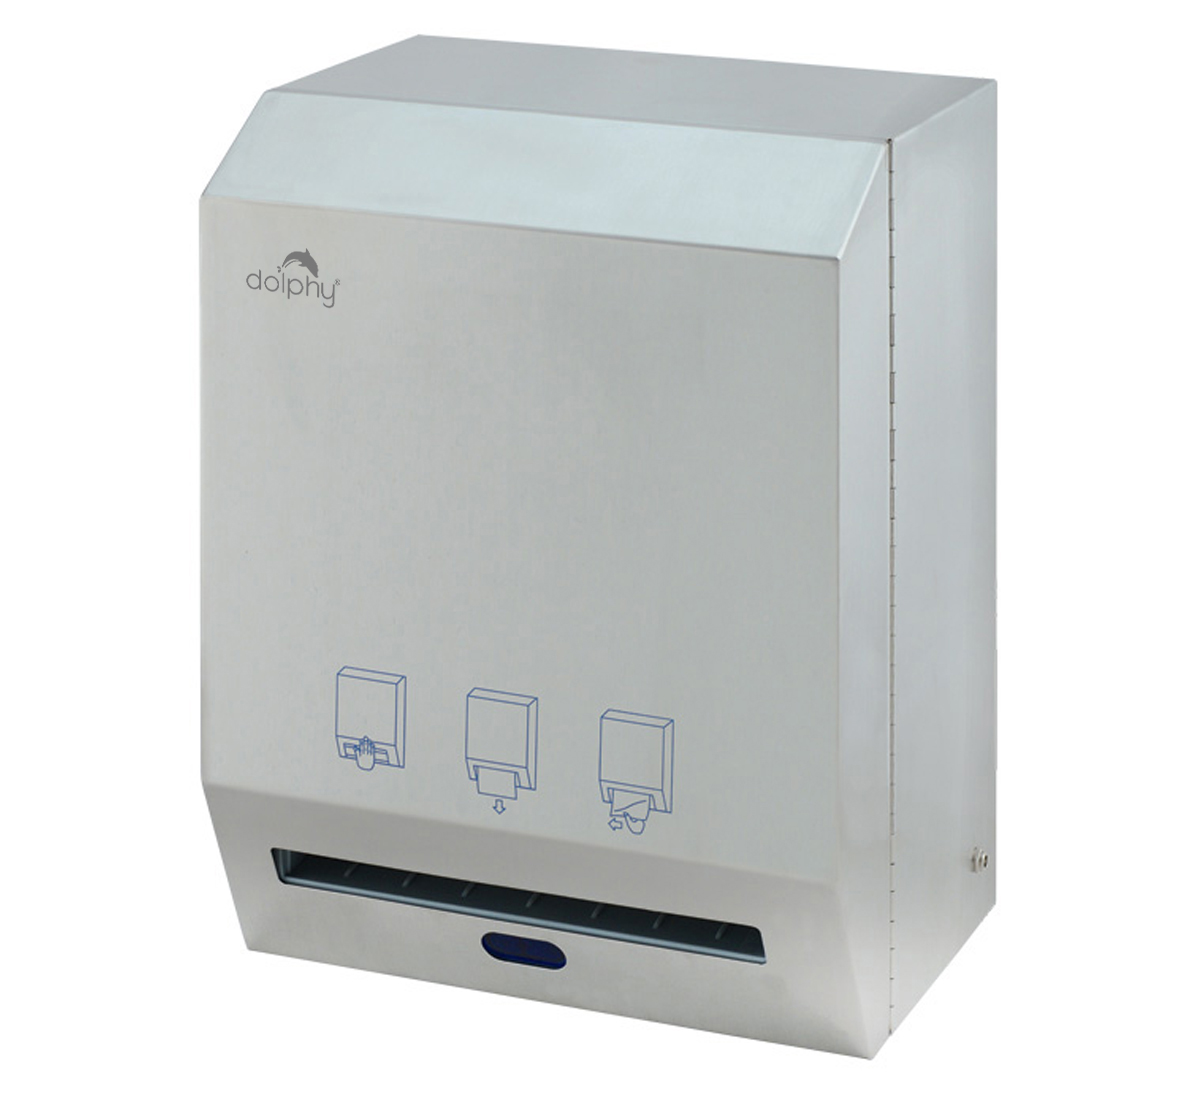 Stainless Steel Auto Roll Towel Dispenser
